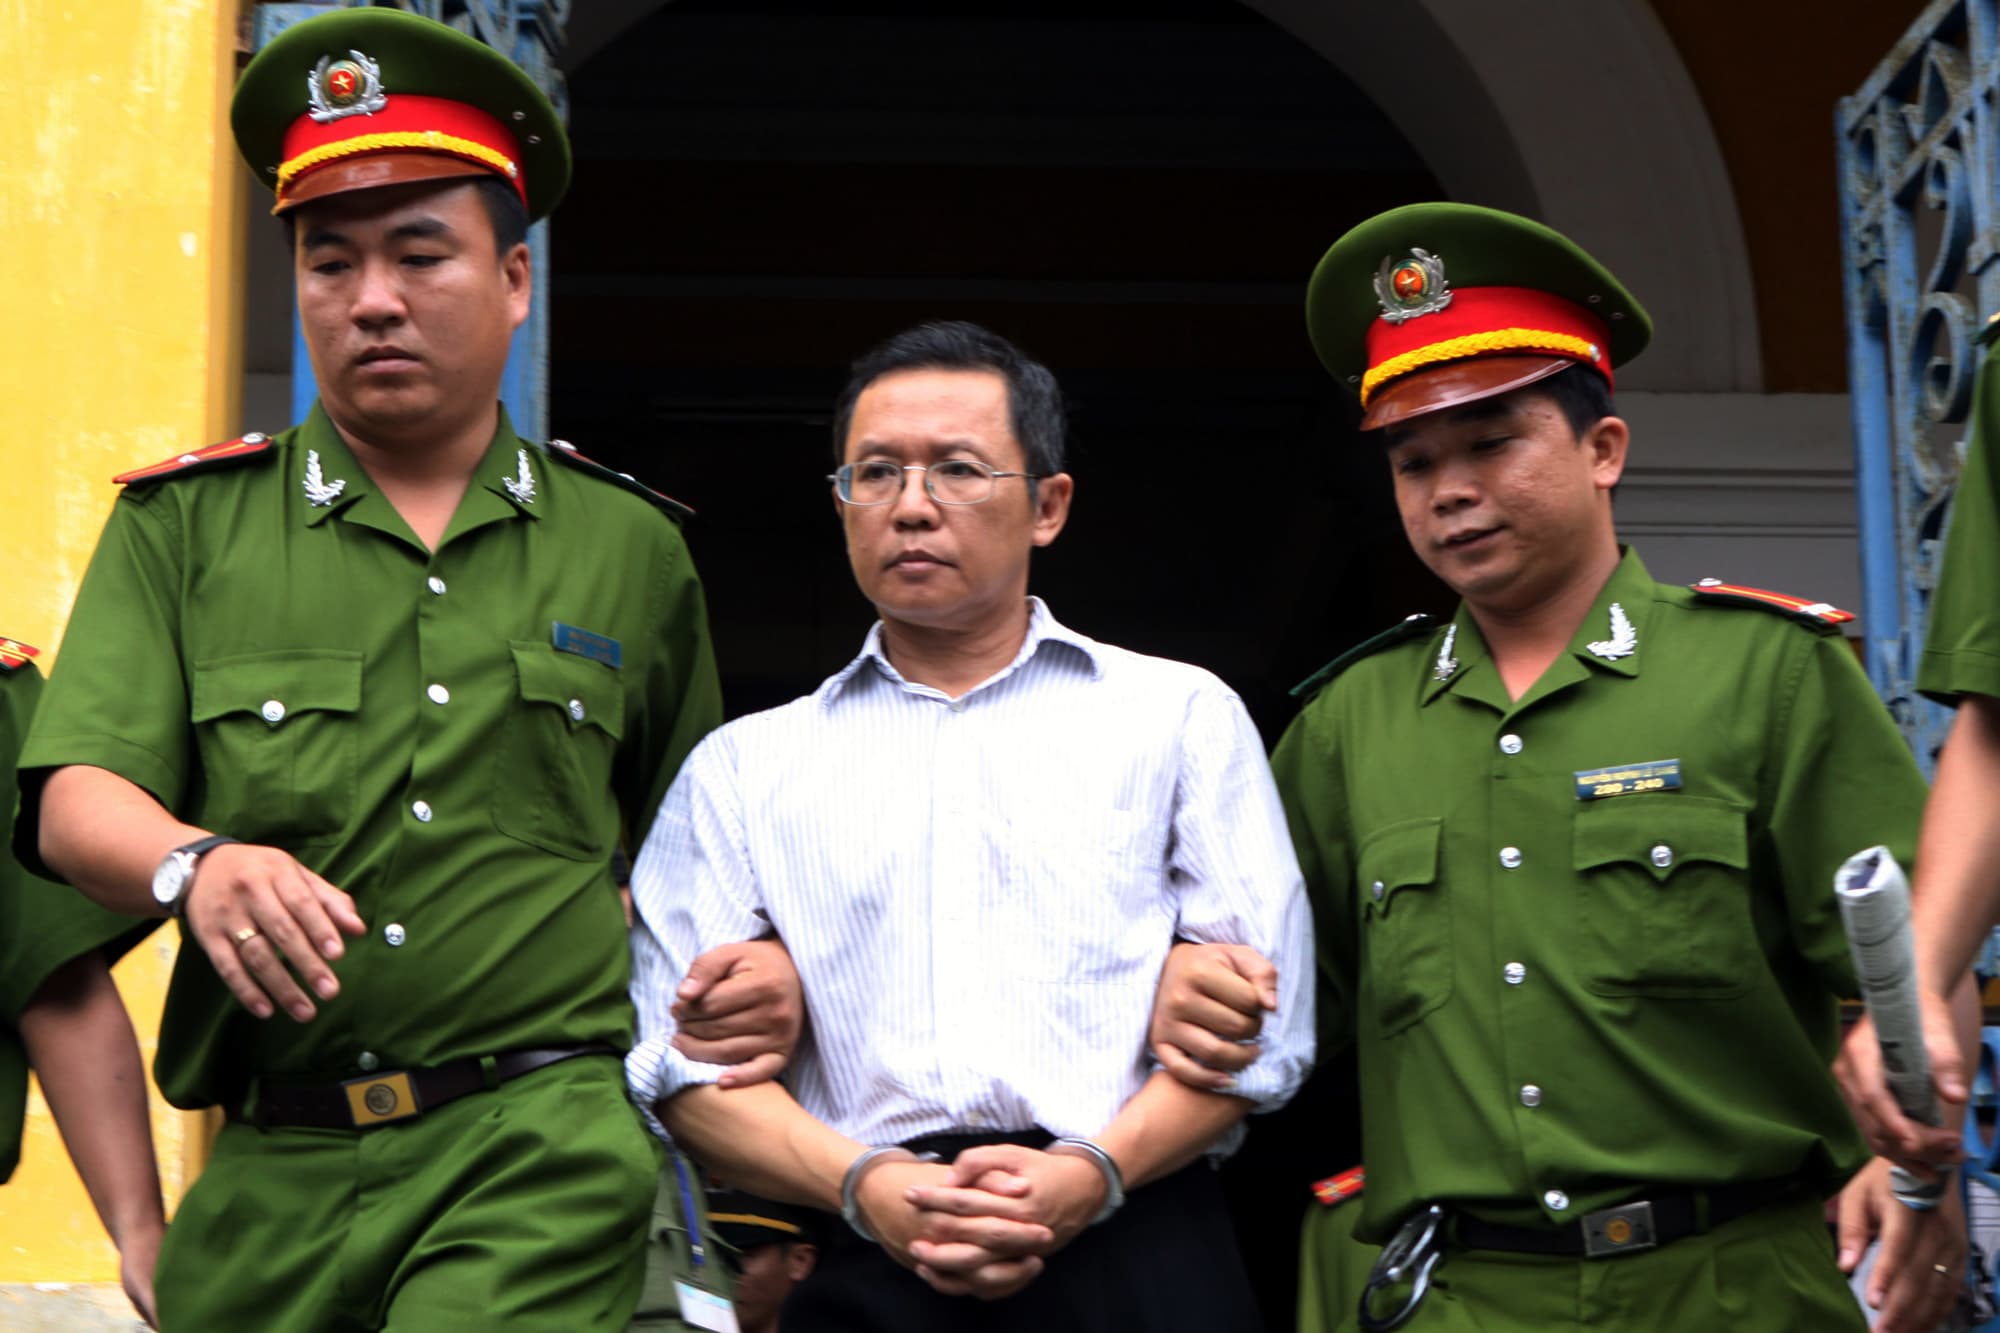 Police officers escort French-Vietnamese math professor Pham Minh Hoang out of a courthouse in Ho Chi Minh City, Vietnam, 10 August 2011, AP Photo/Vietnam News Agency, Hoang Hai